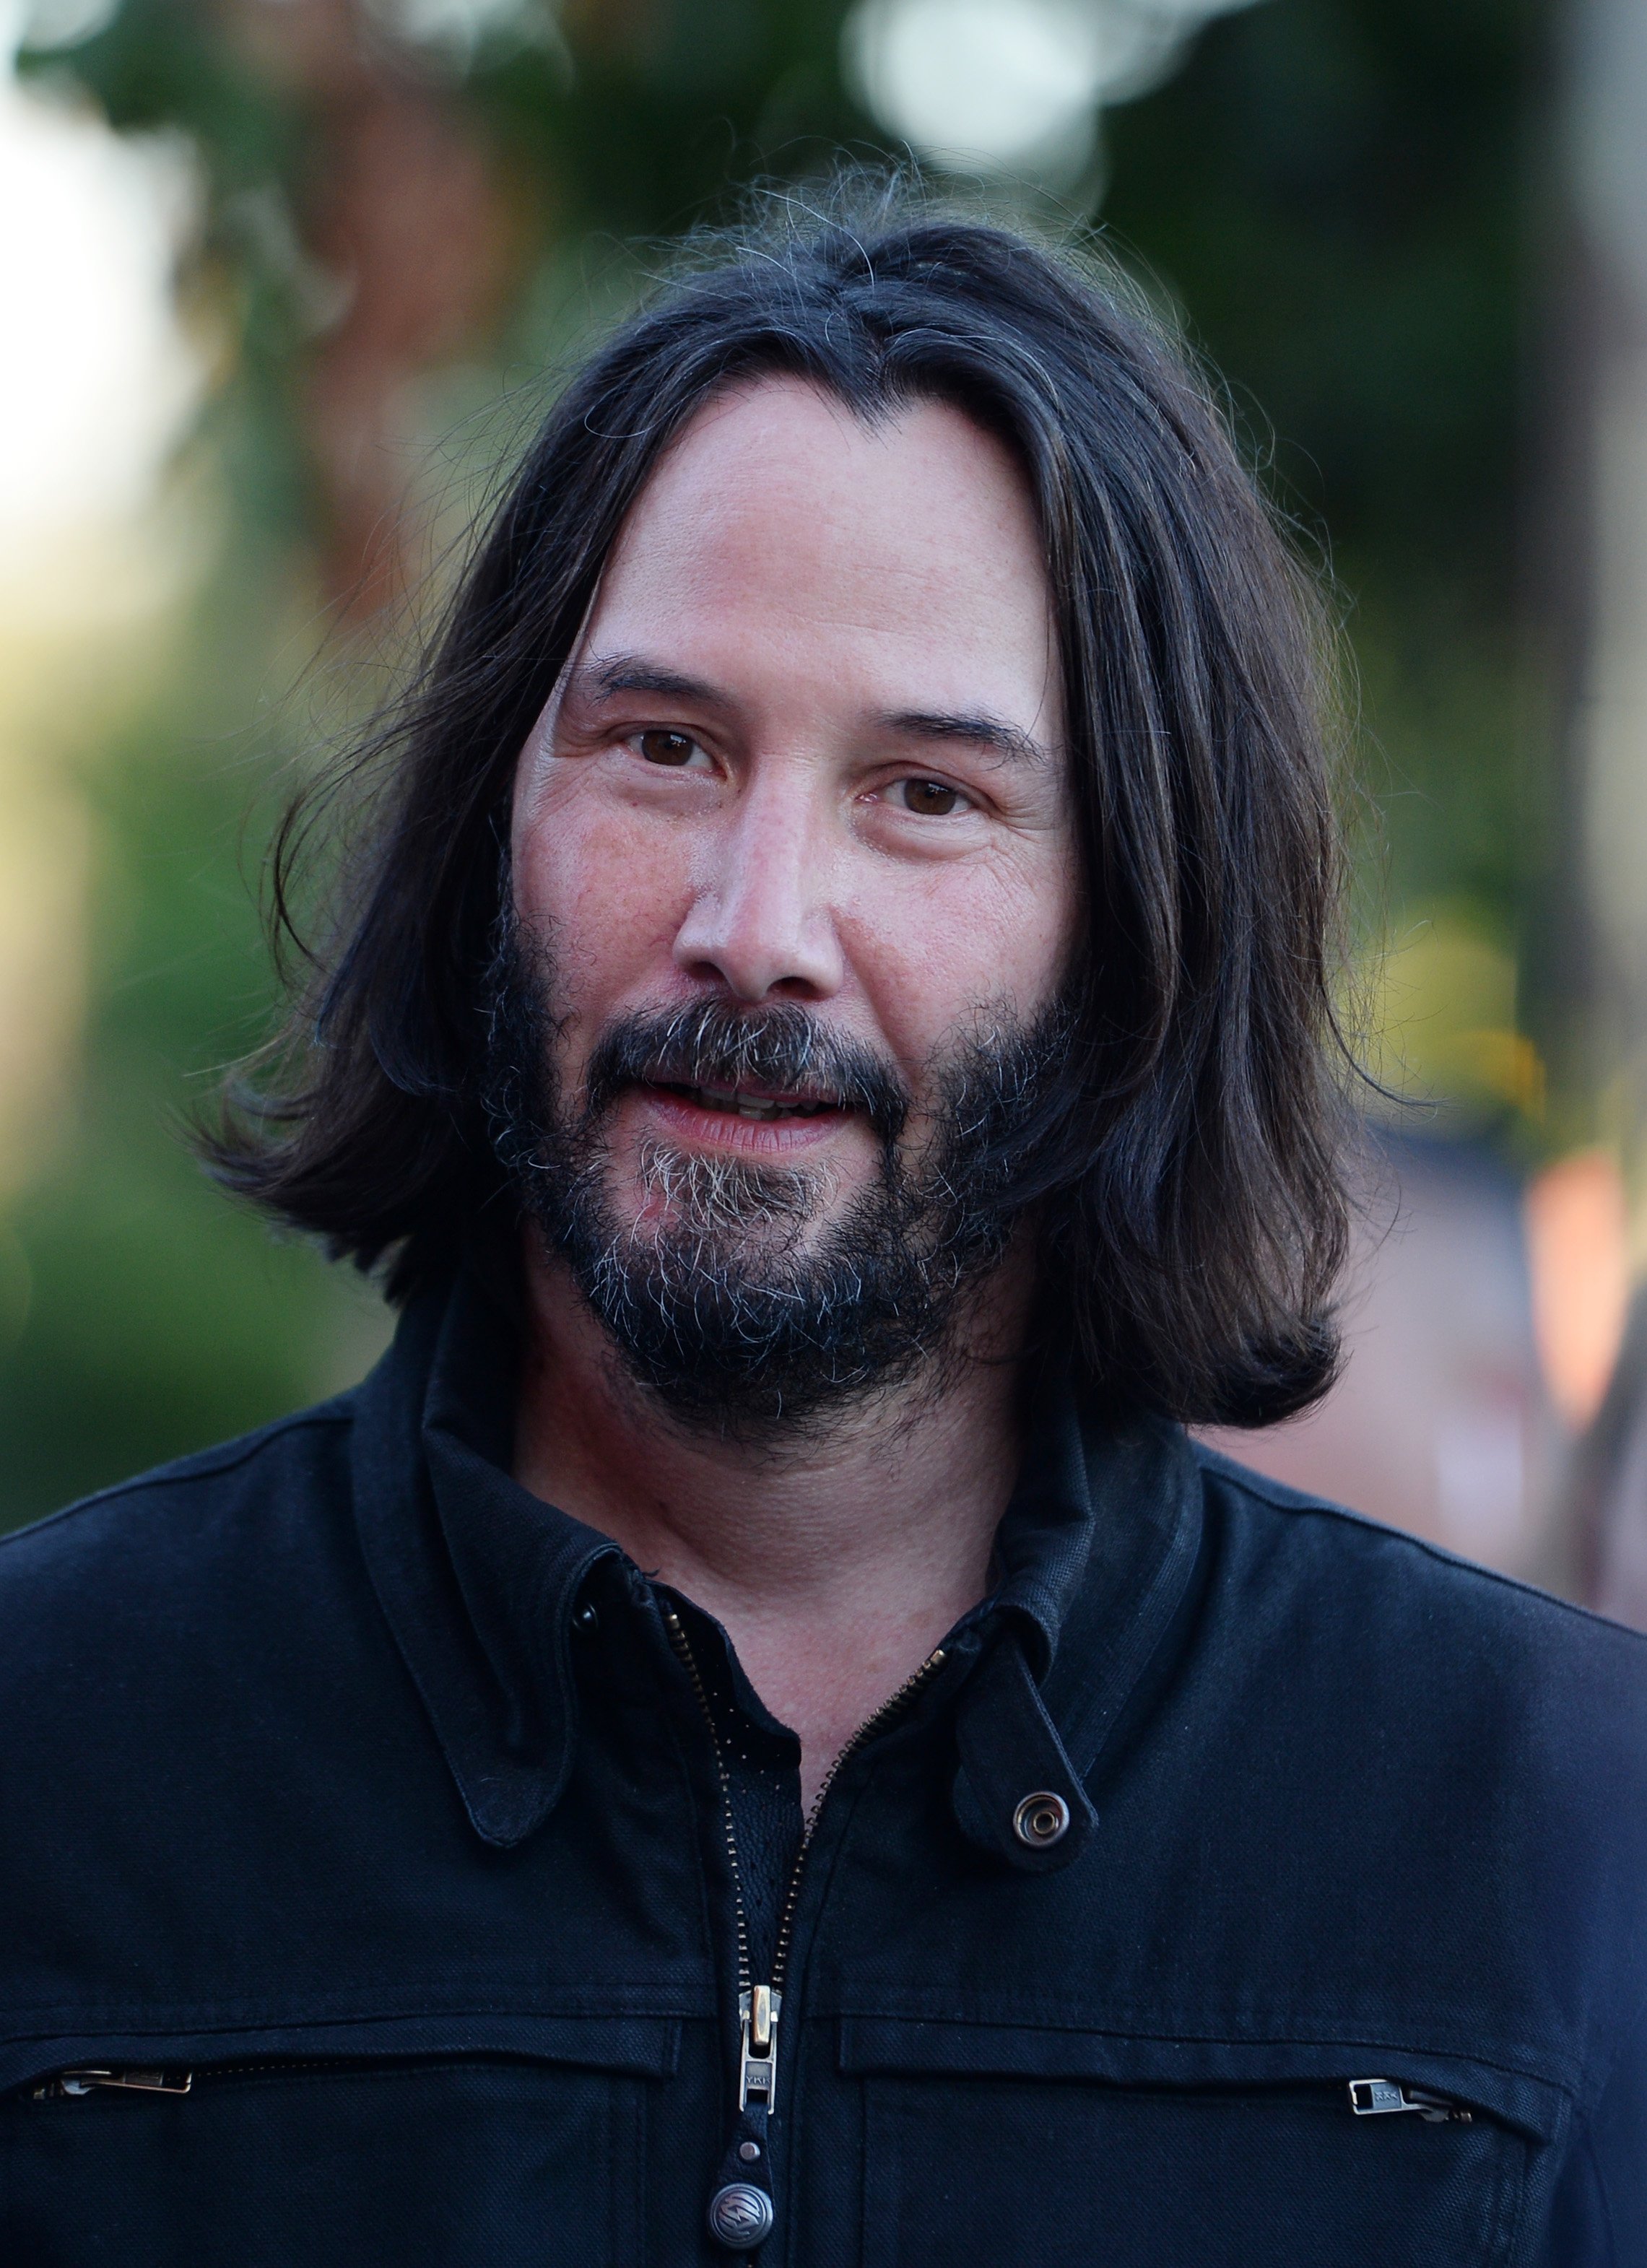 Keanu Reeves arrives at the LA Special Screening of Amazon's "Too Old To Die Young" on June 10, 2019, in Los Angeles, California. | Source: Getty Images.